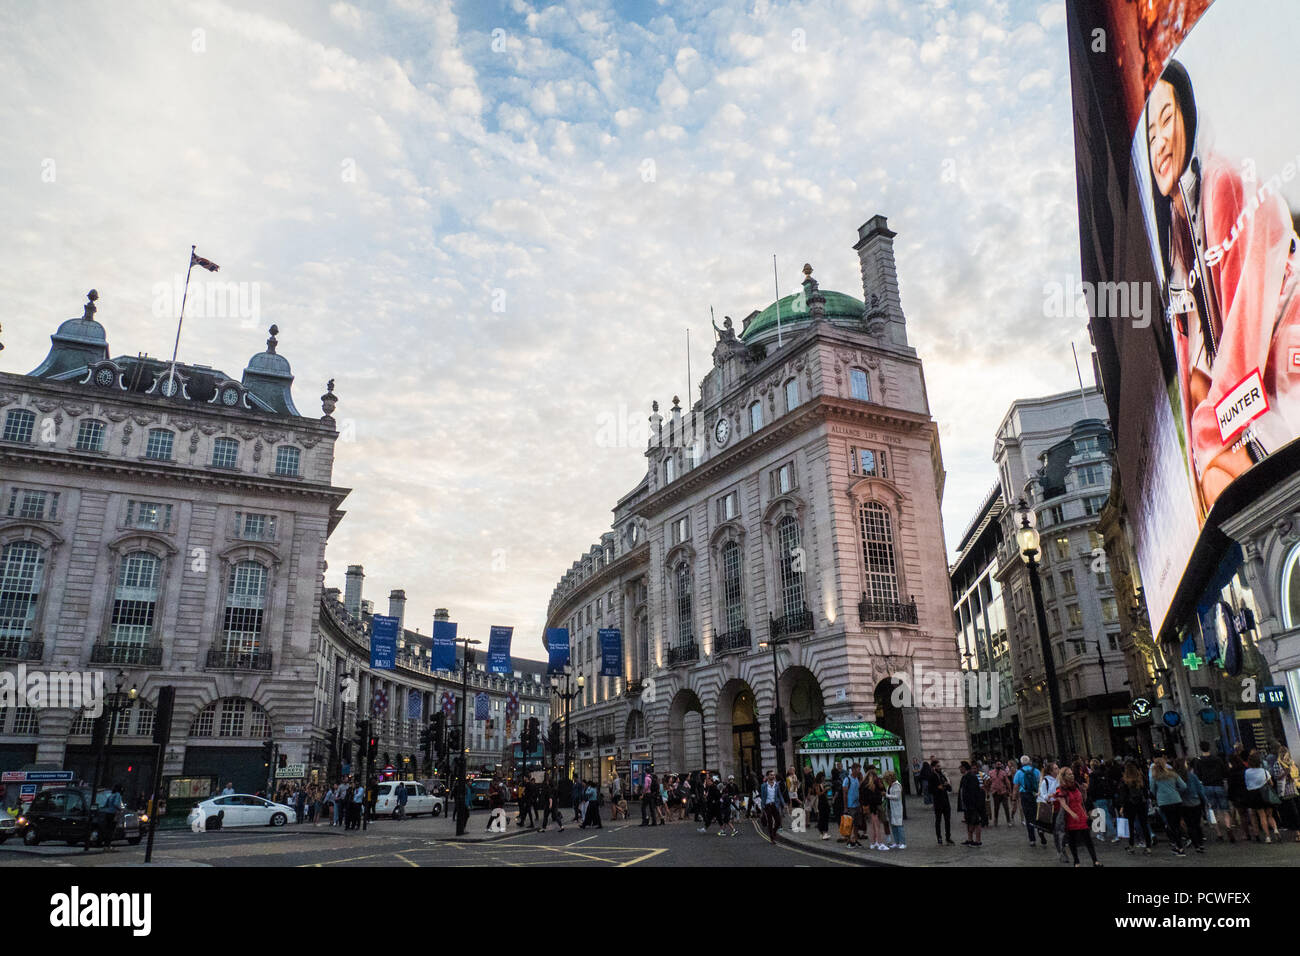 Piccadilly Circus, famous for its Stock Photo